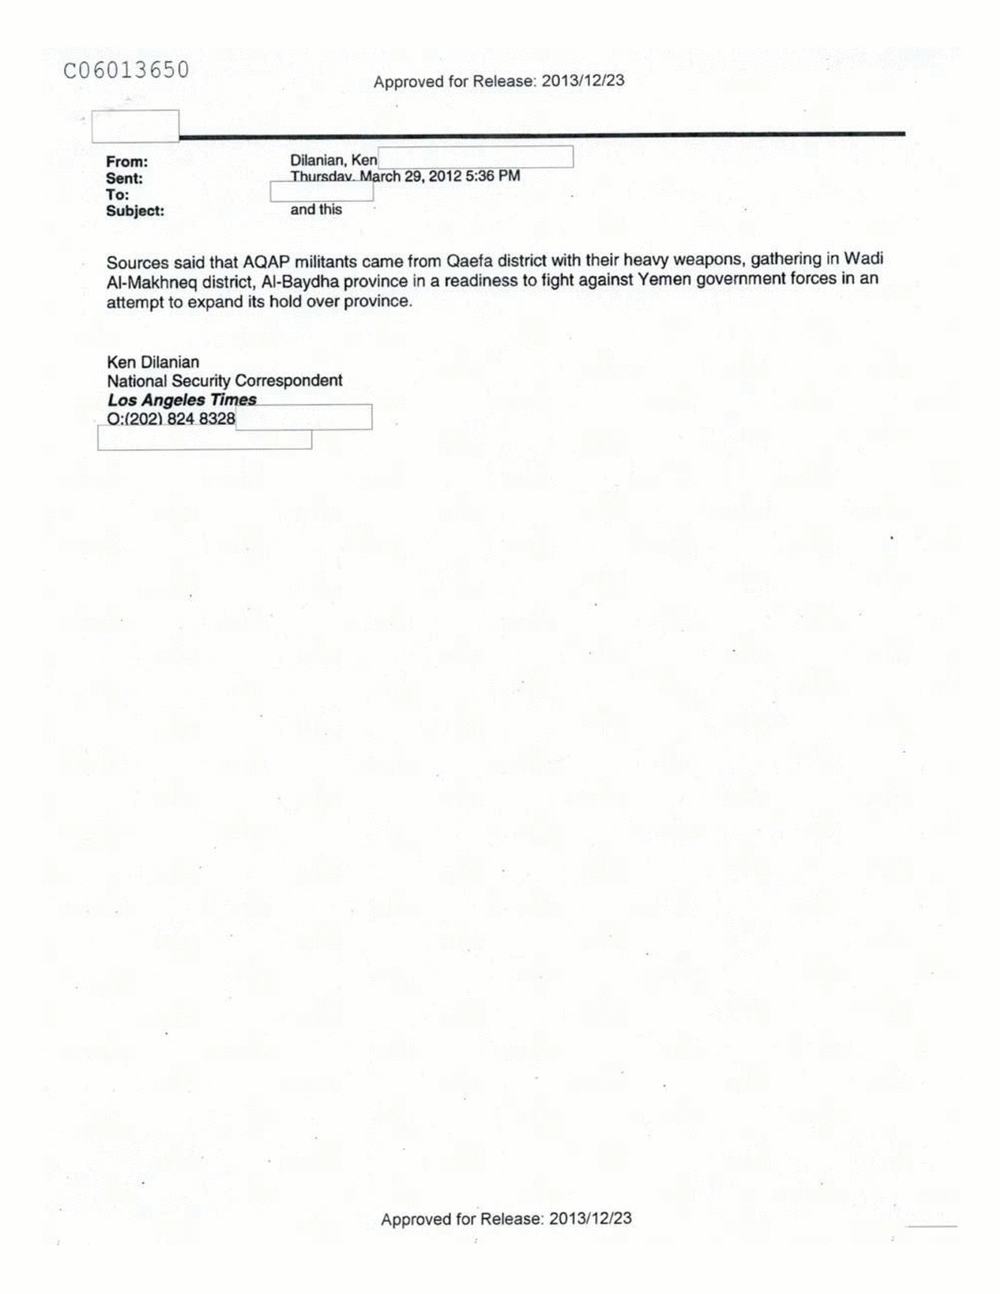 Page 501 from Email Correspondence Between Reporters and CIA Flacks